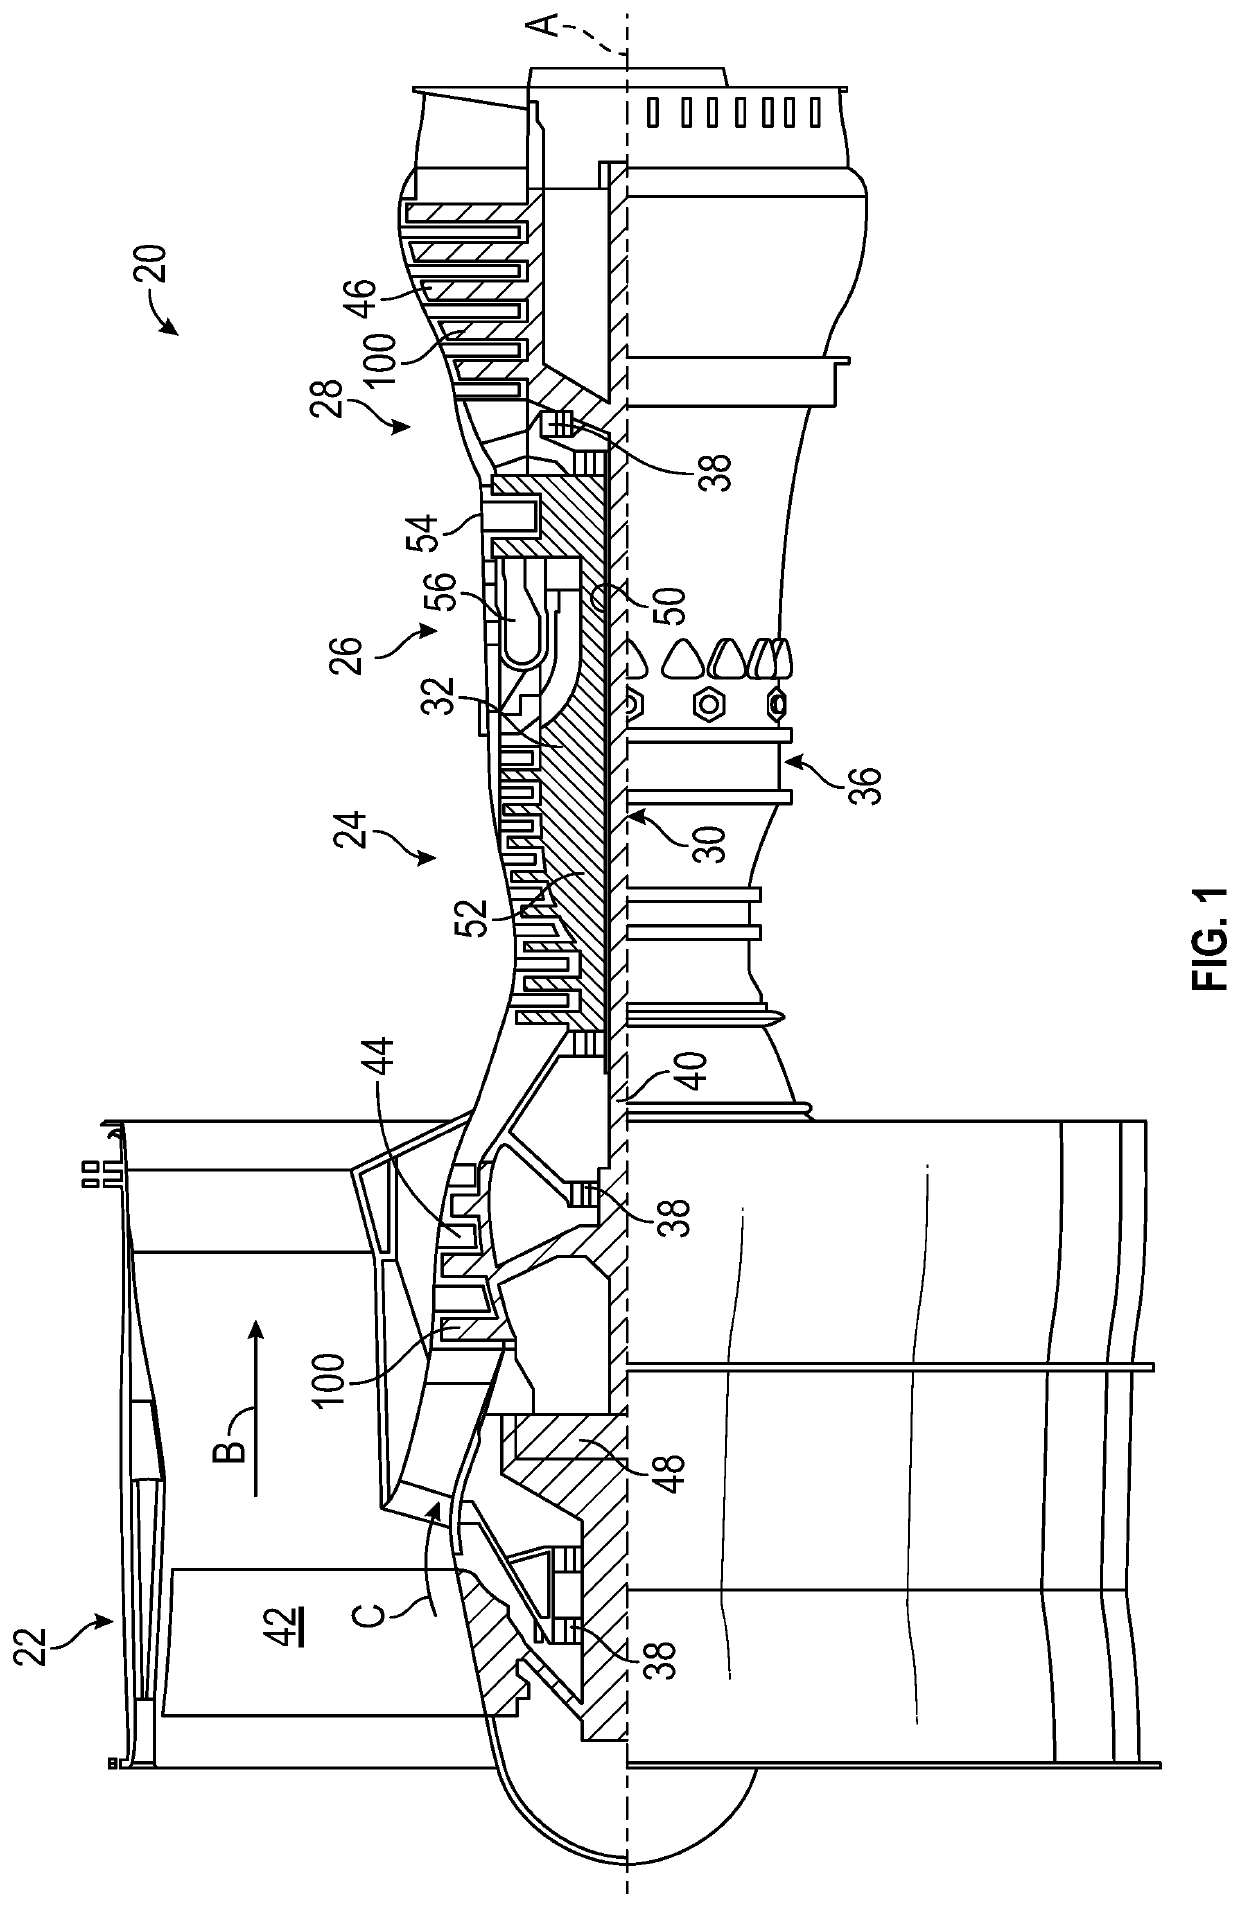 Hollow fan blade constrained layer damper